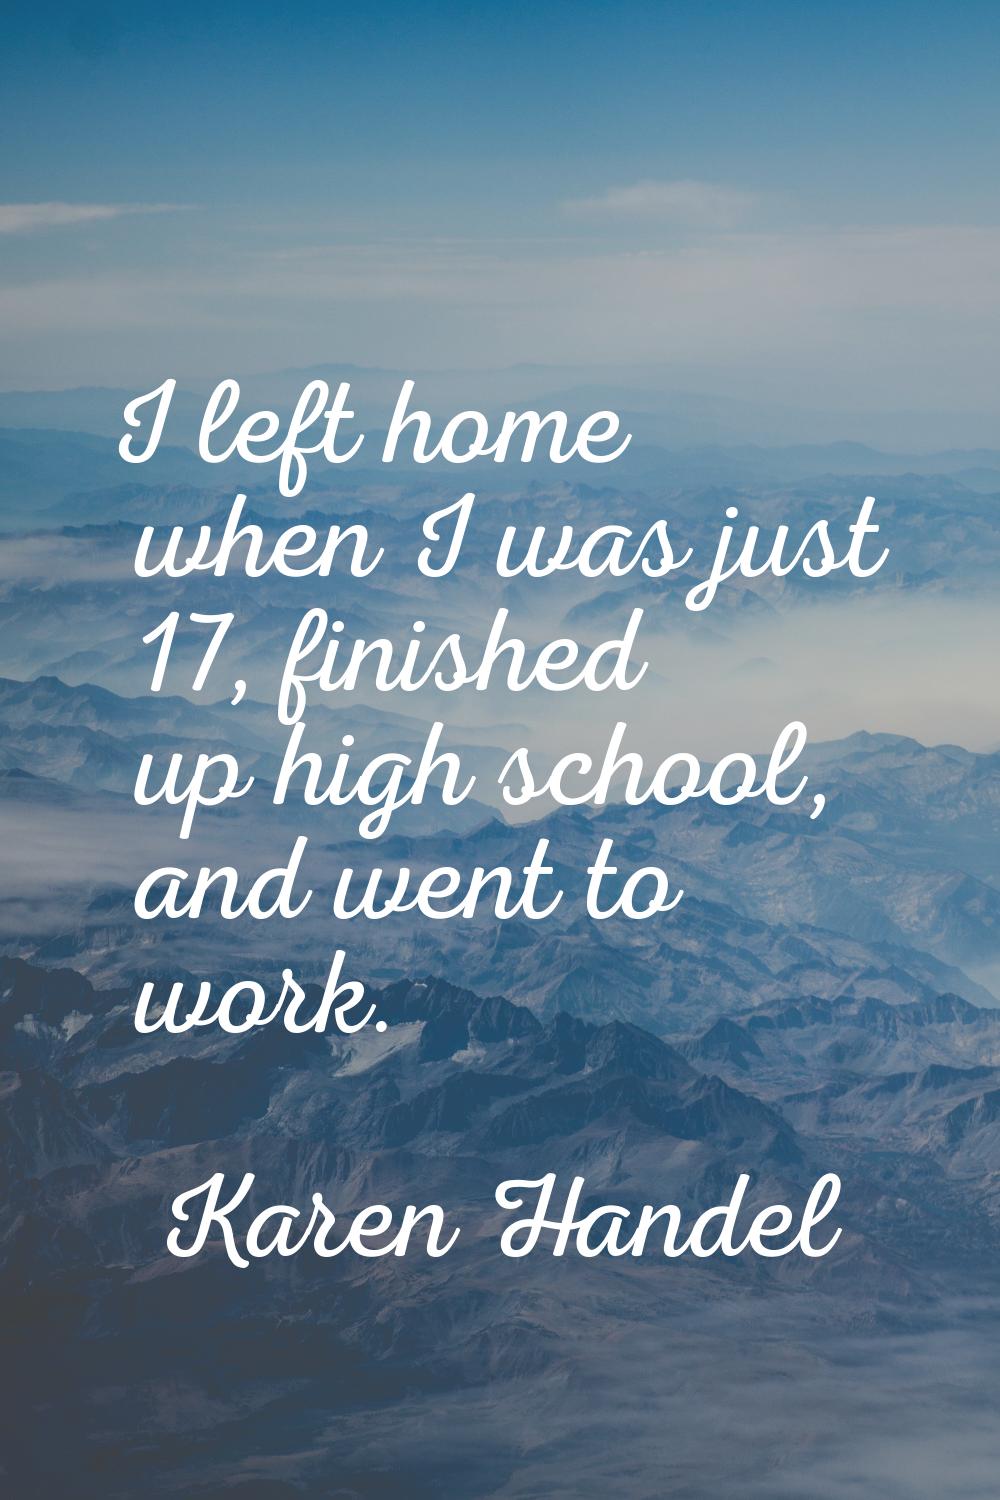 I left home when I was just 17, finished up high school, and went to work.